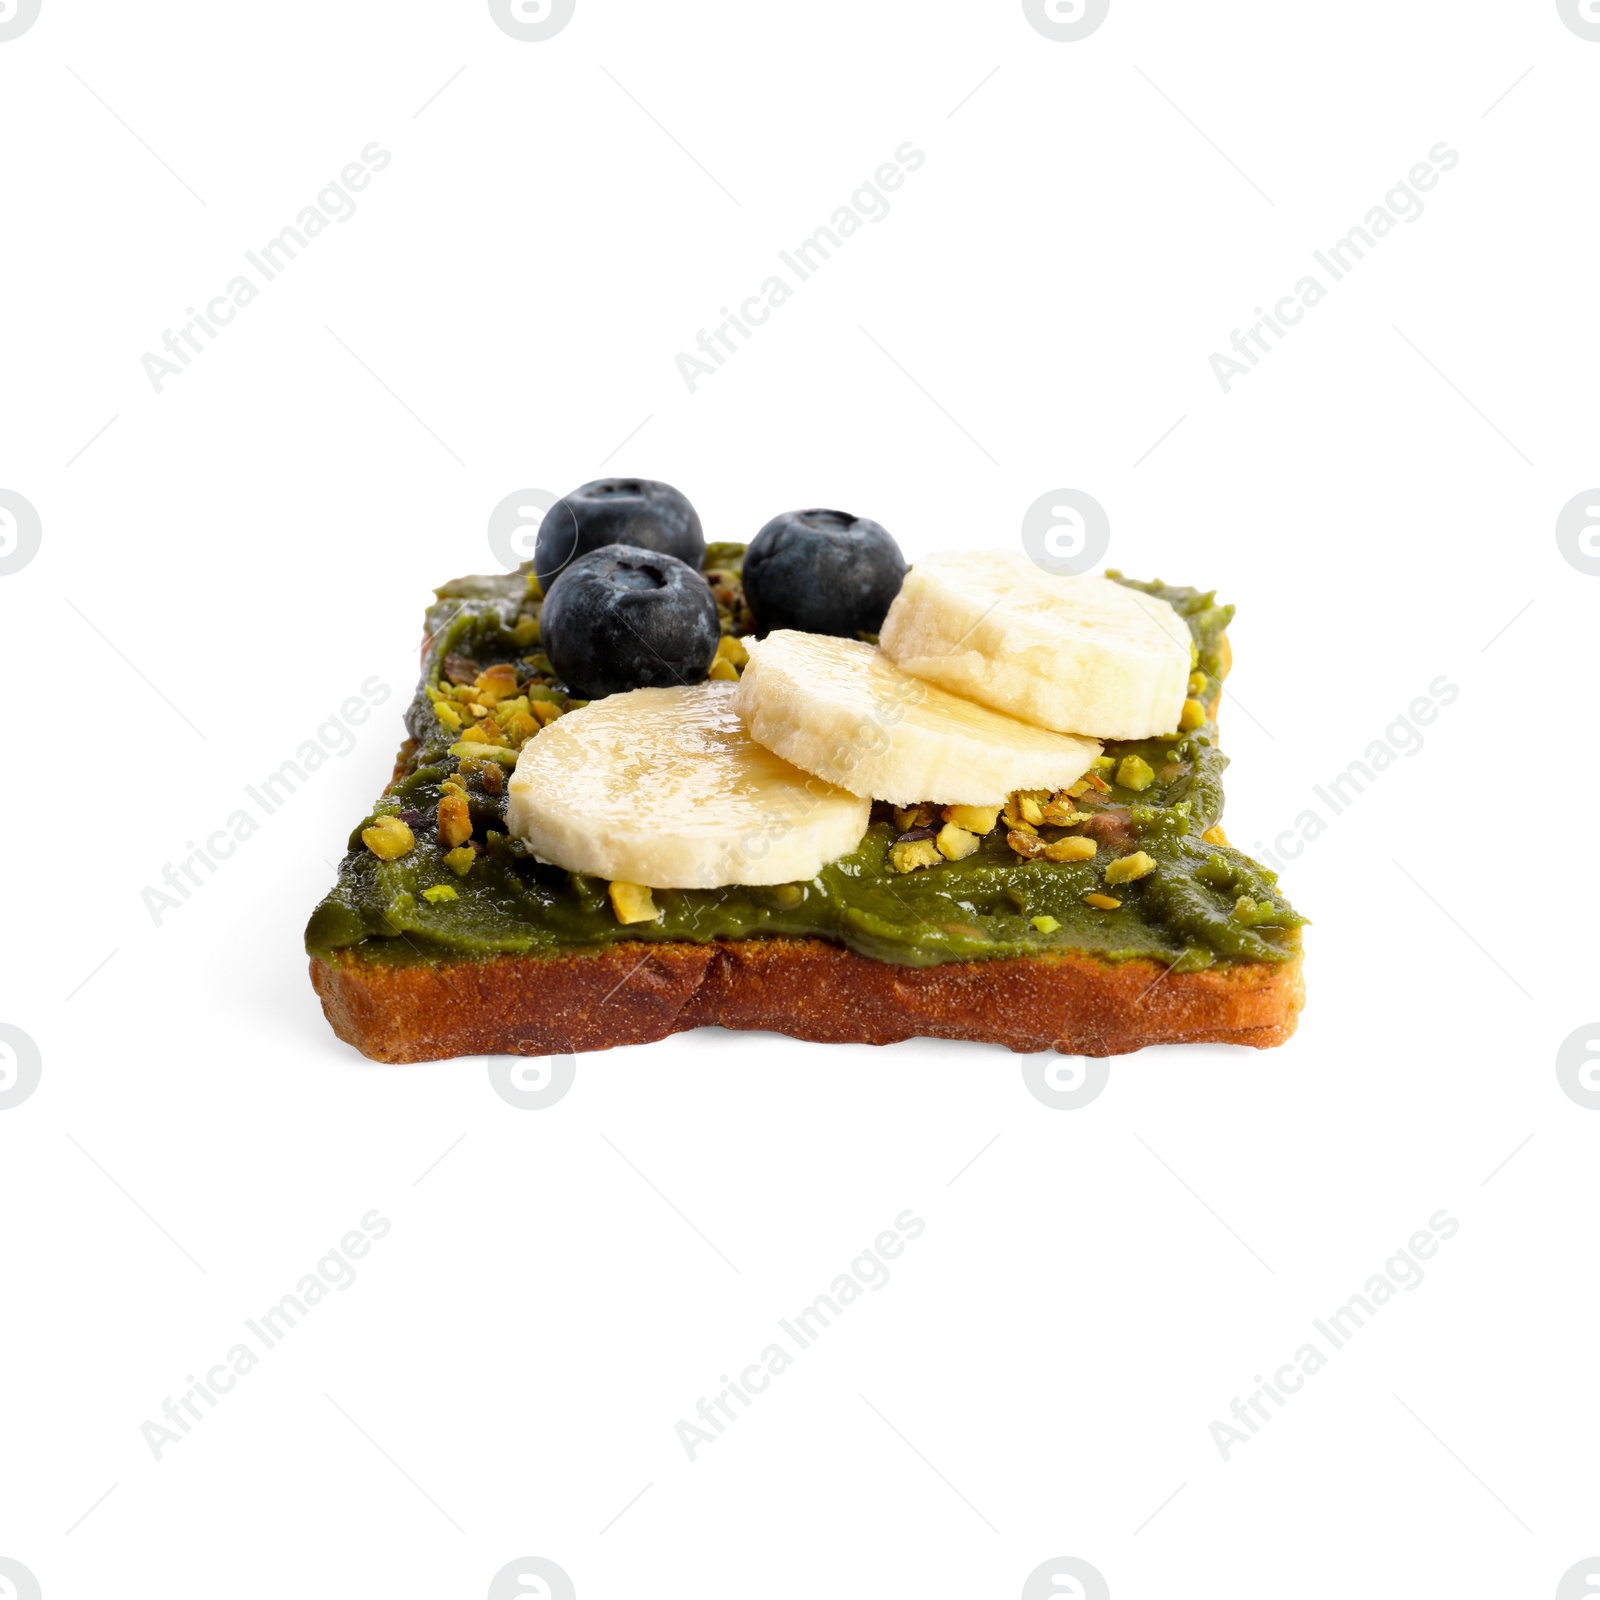 Photo of Toast with tasty pistachio butter, banana slices, blueberries and nuts isolated on white